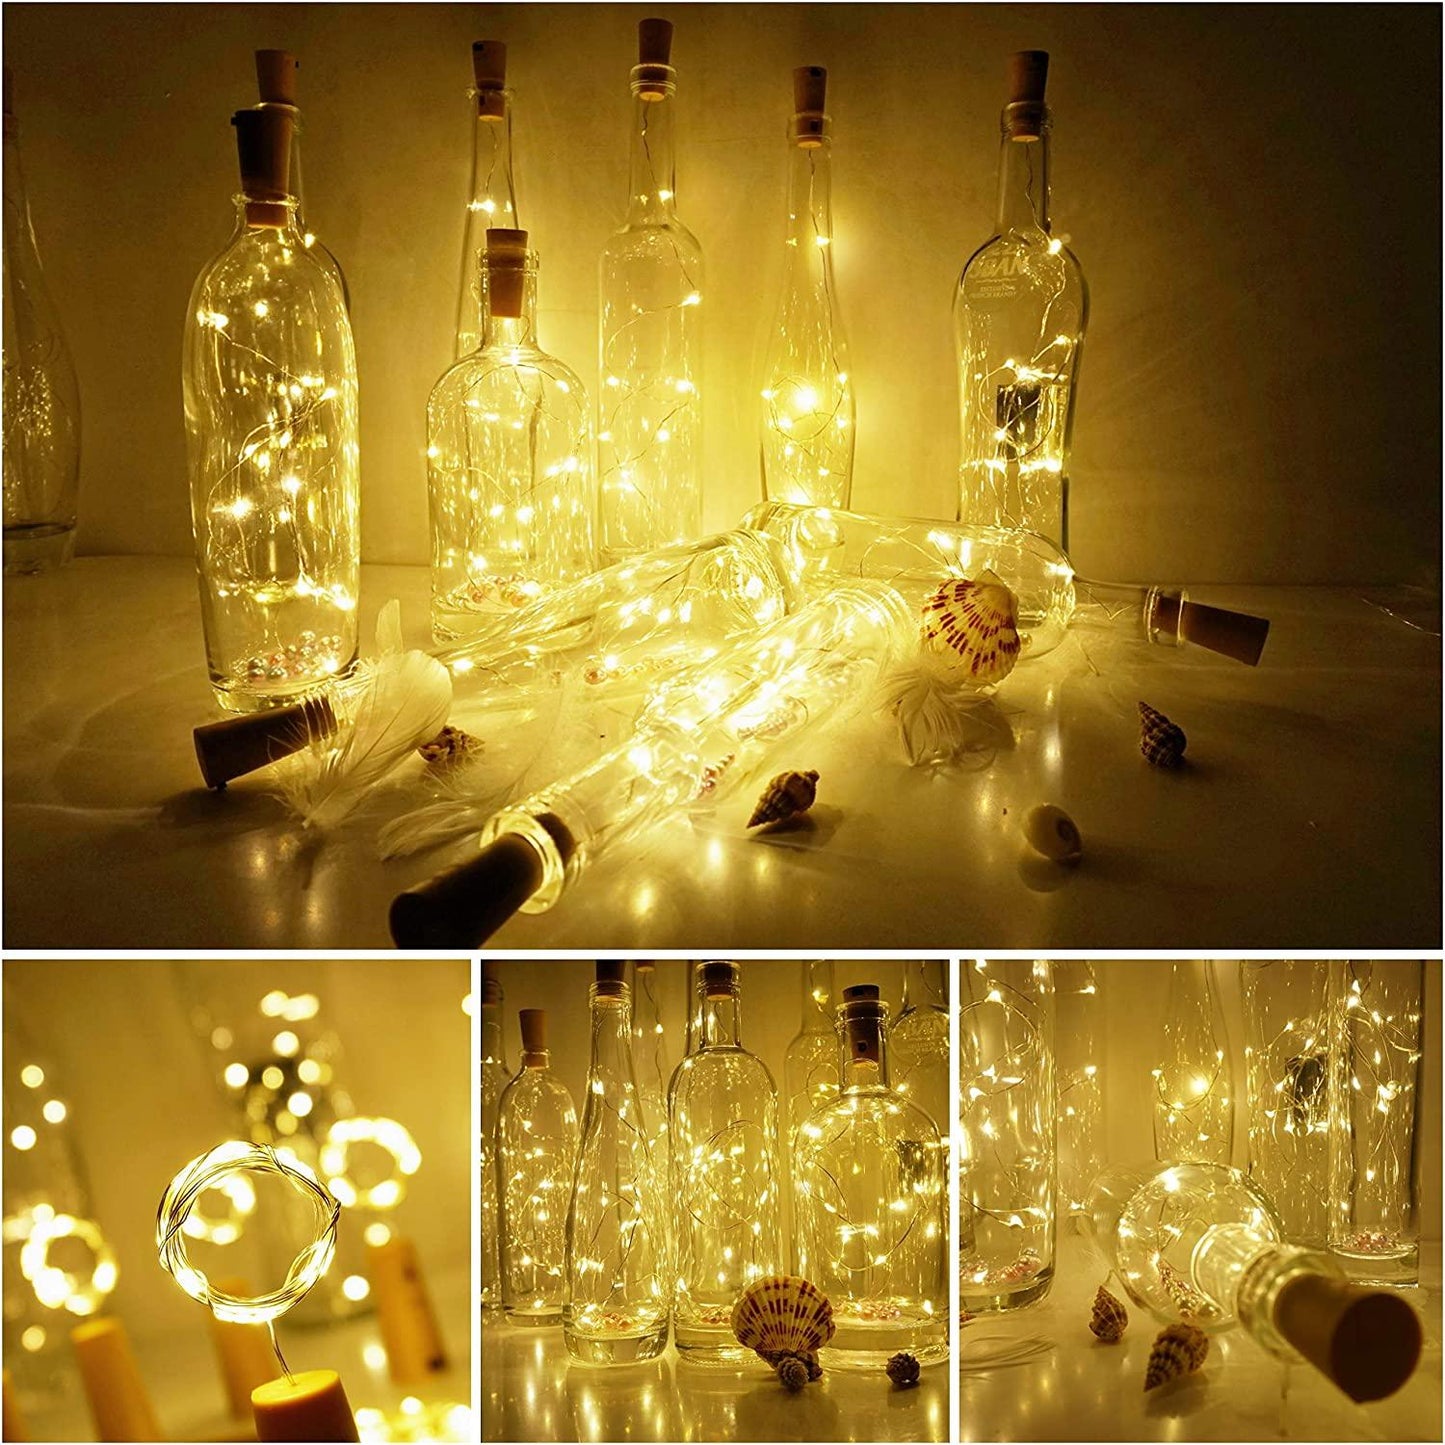 Fairy String Lights LED Wine Bottle Cork Lights Battery Operated Flexible Starry Lights for DIY Party Wedding - If you say i do